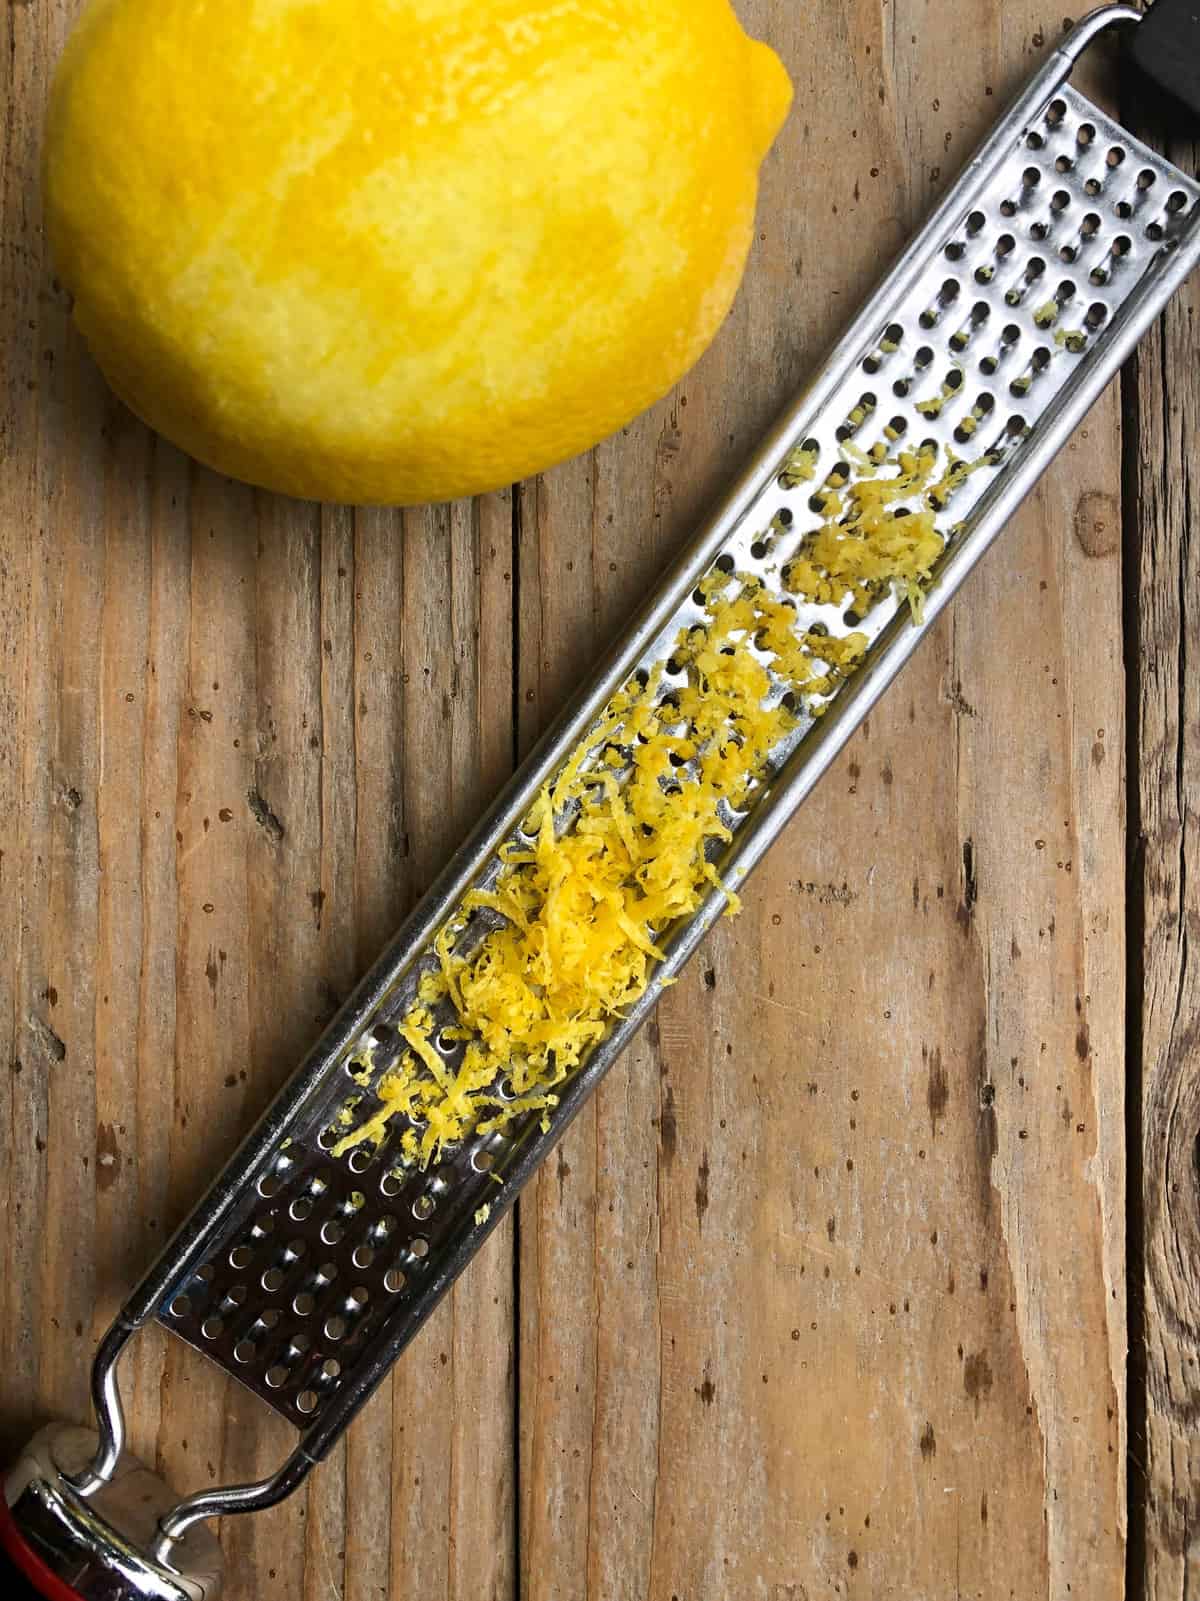 Zest one lemon and crush a few cloves of garlic and set aside.